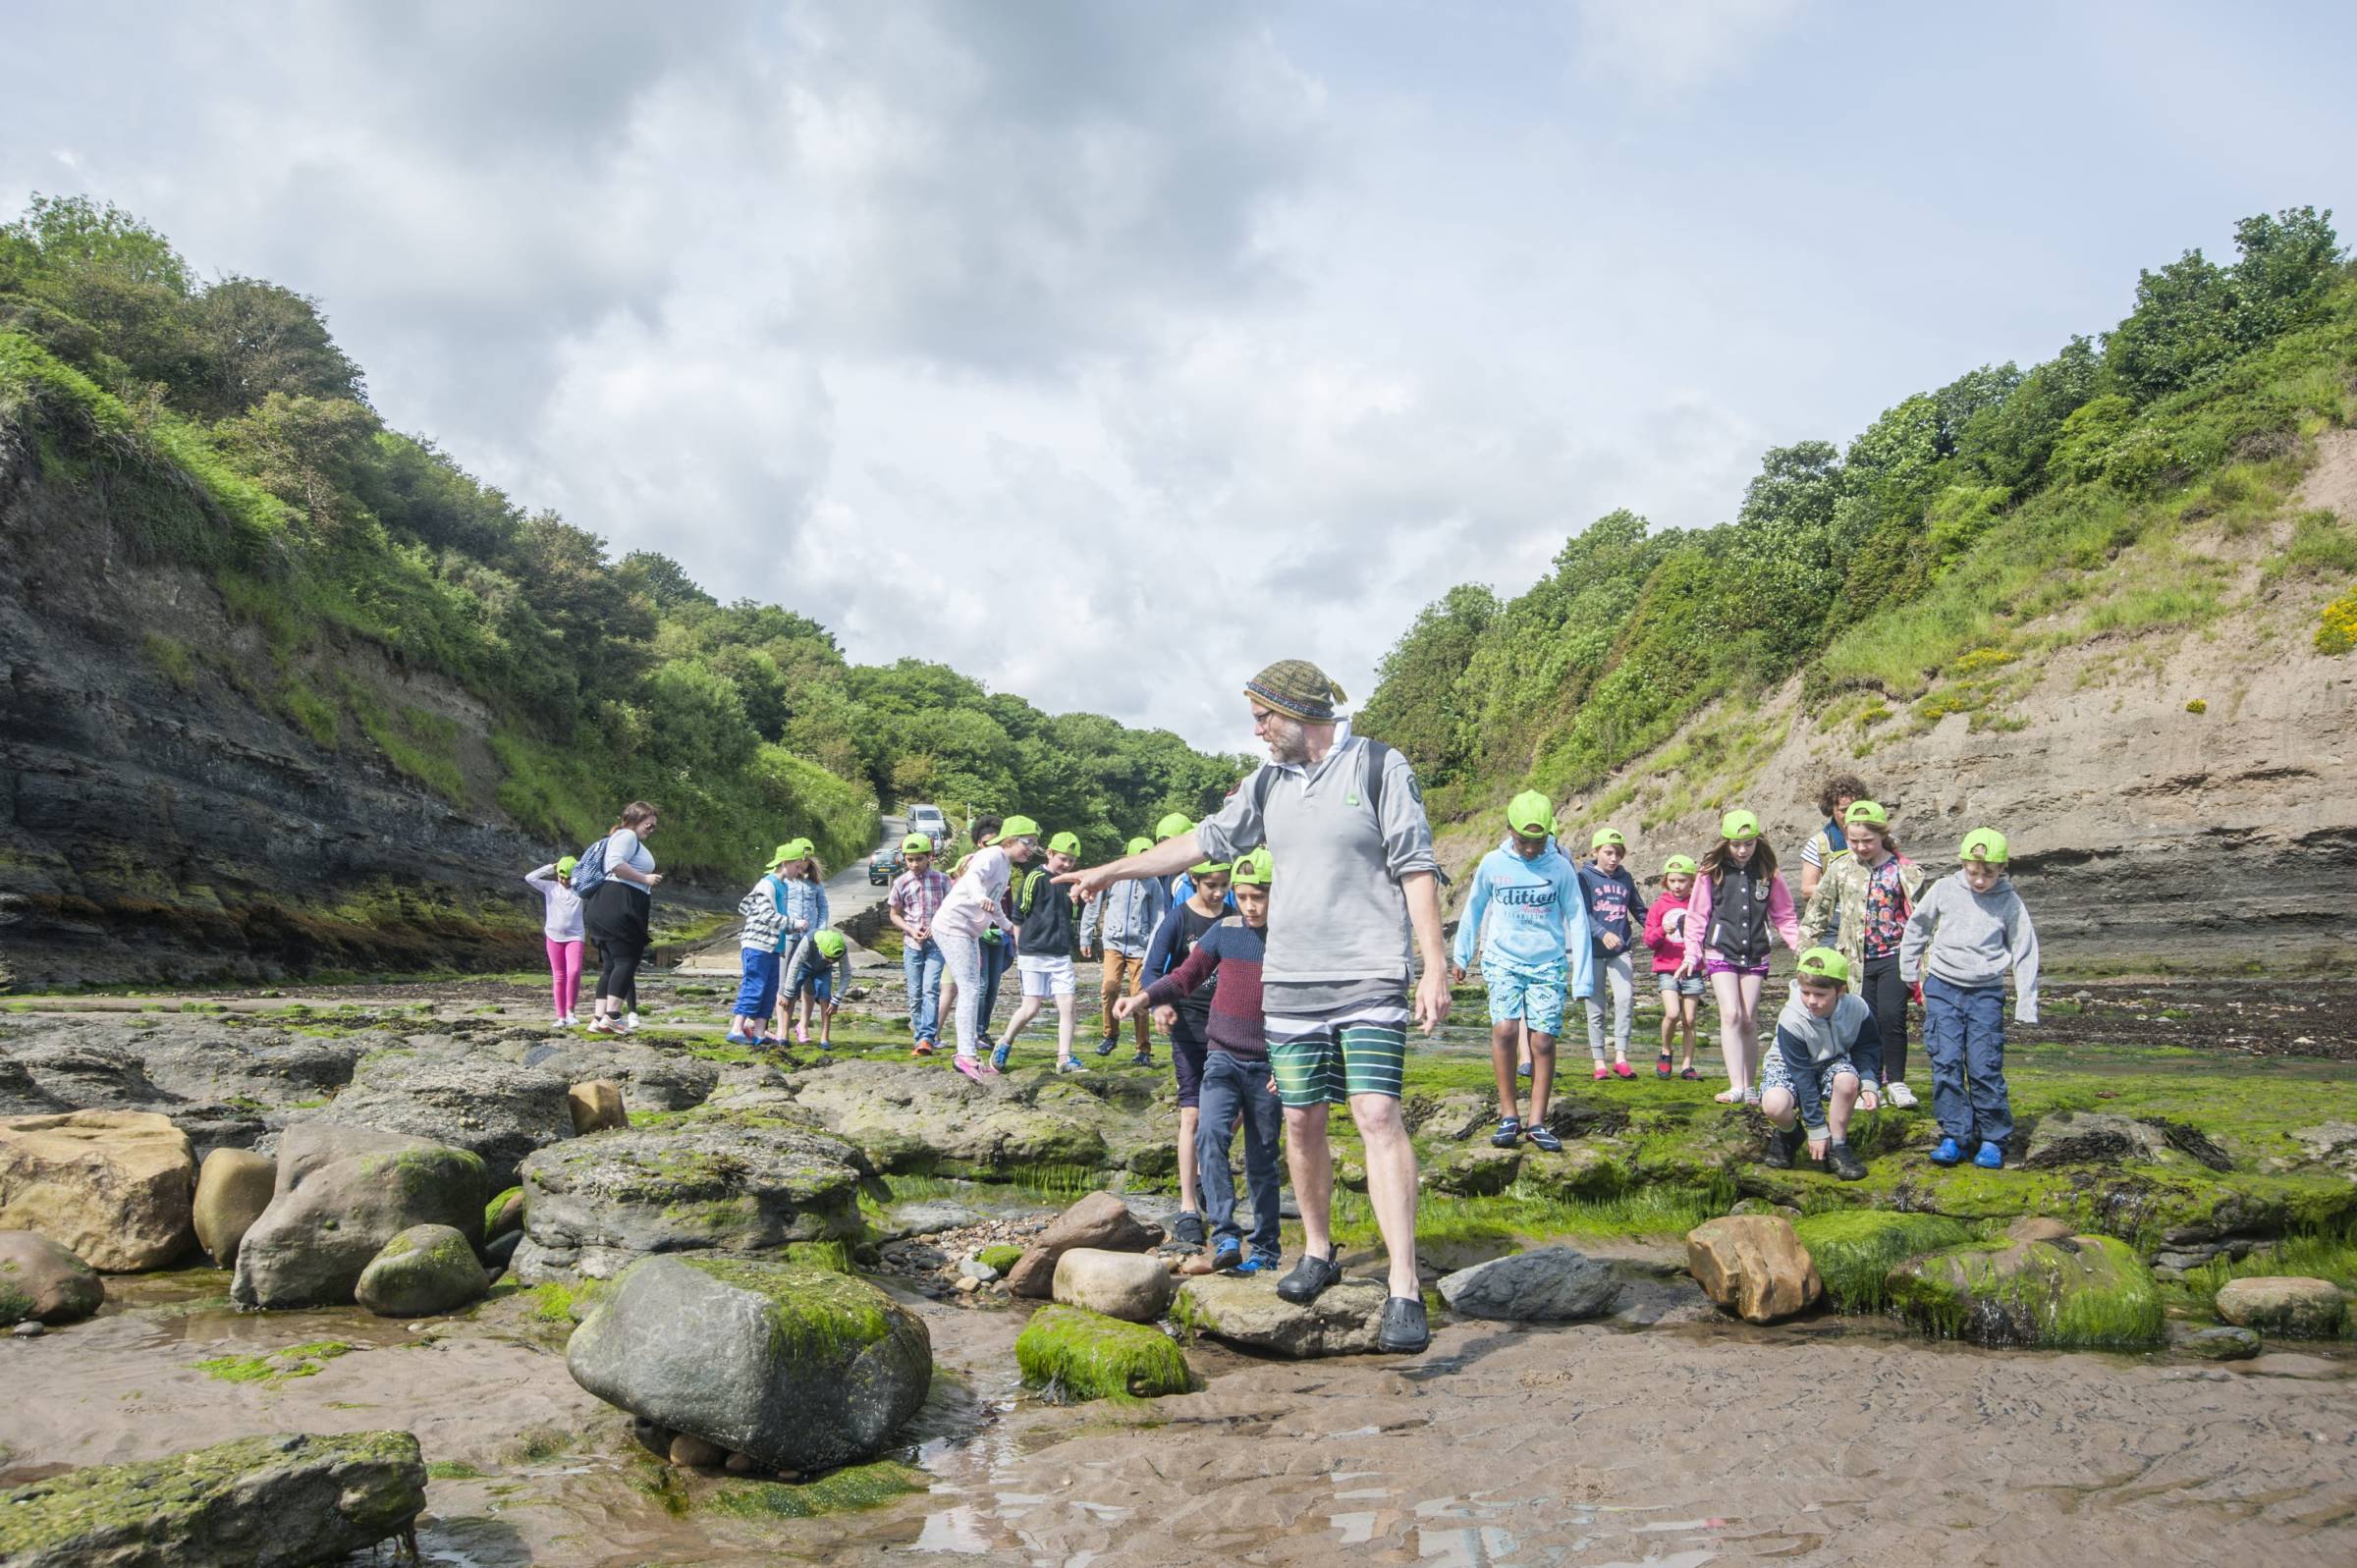 School group on a beach rock pooling